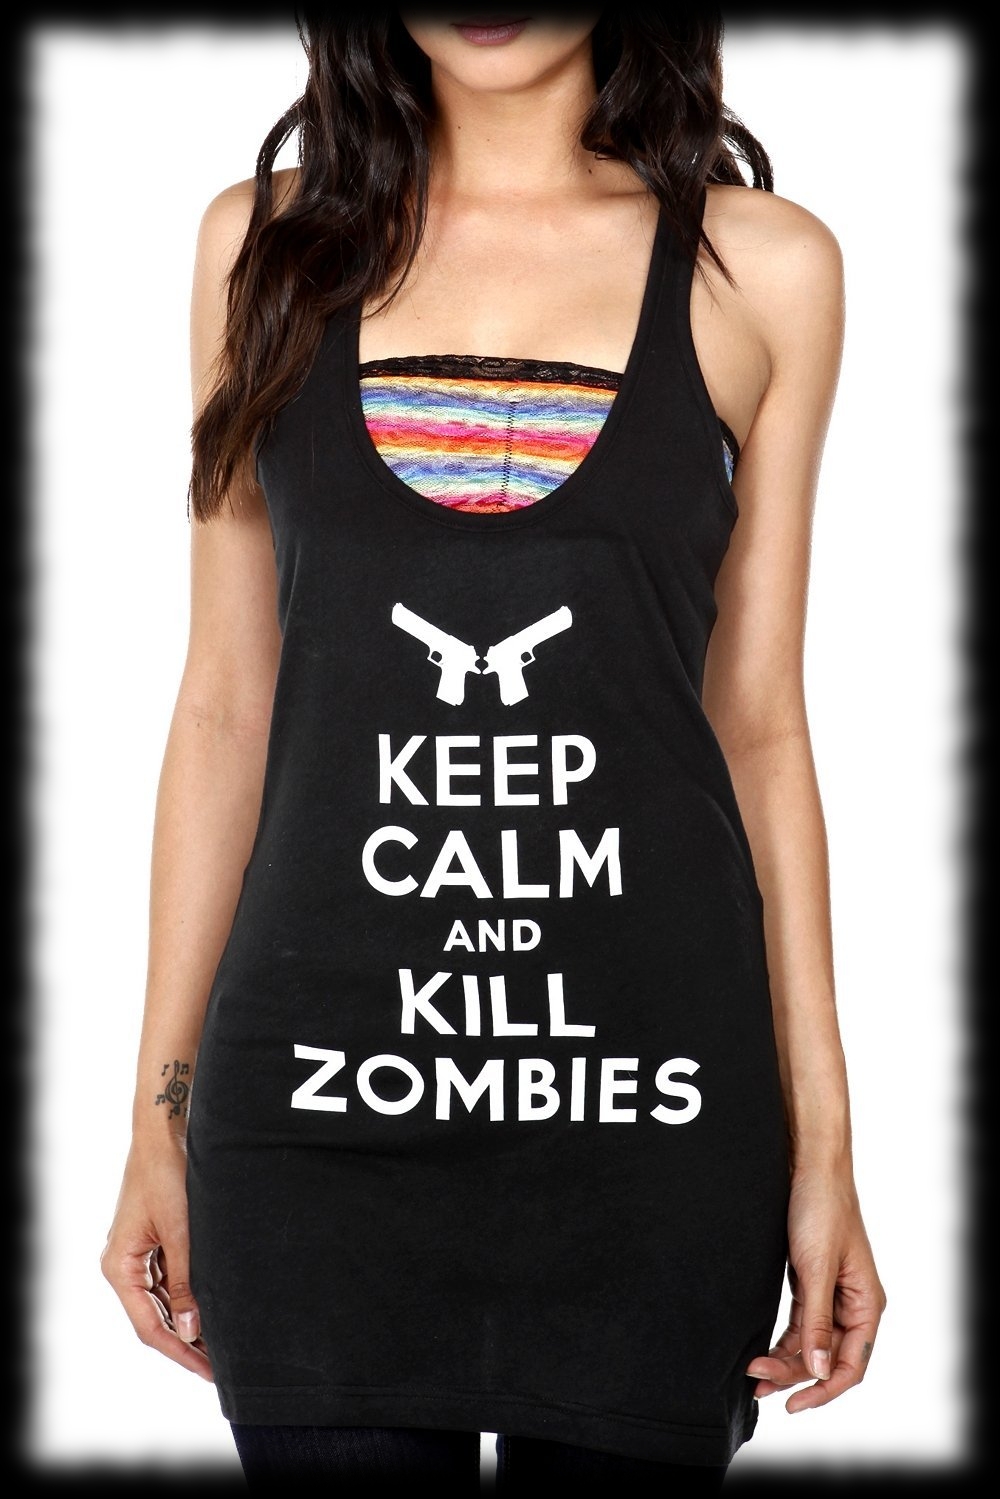 Girls Shirt For Sale Keep Calm and Kill Zombies